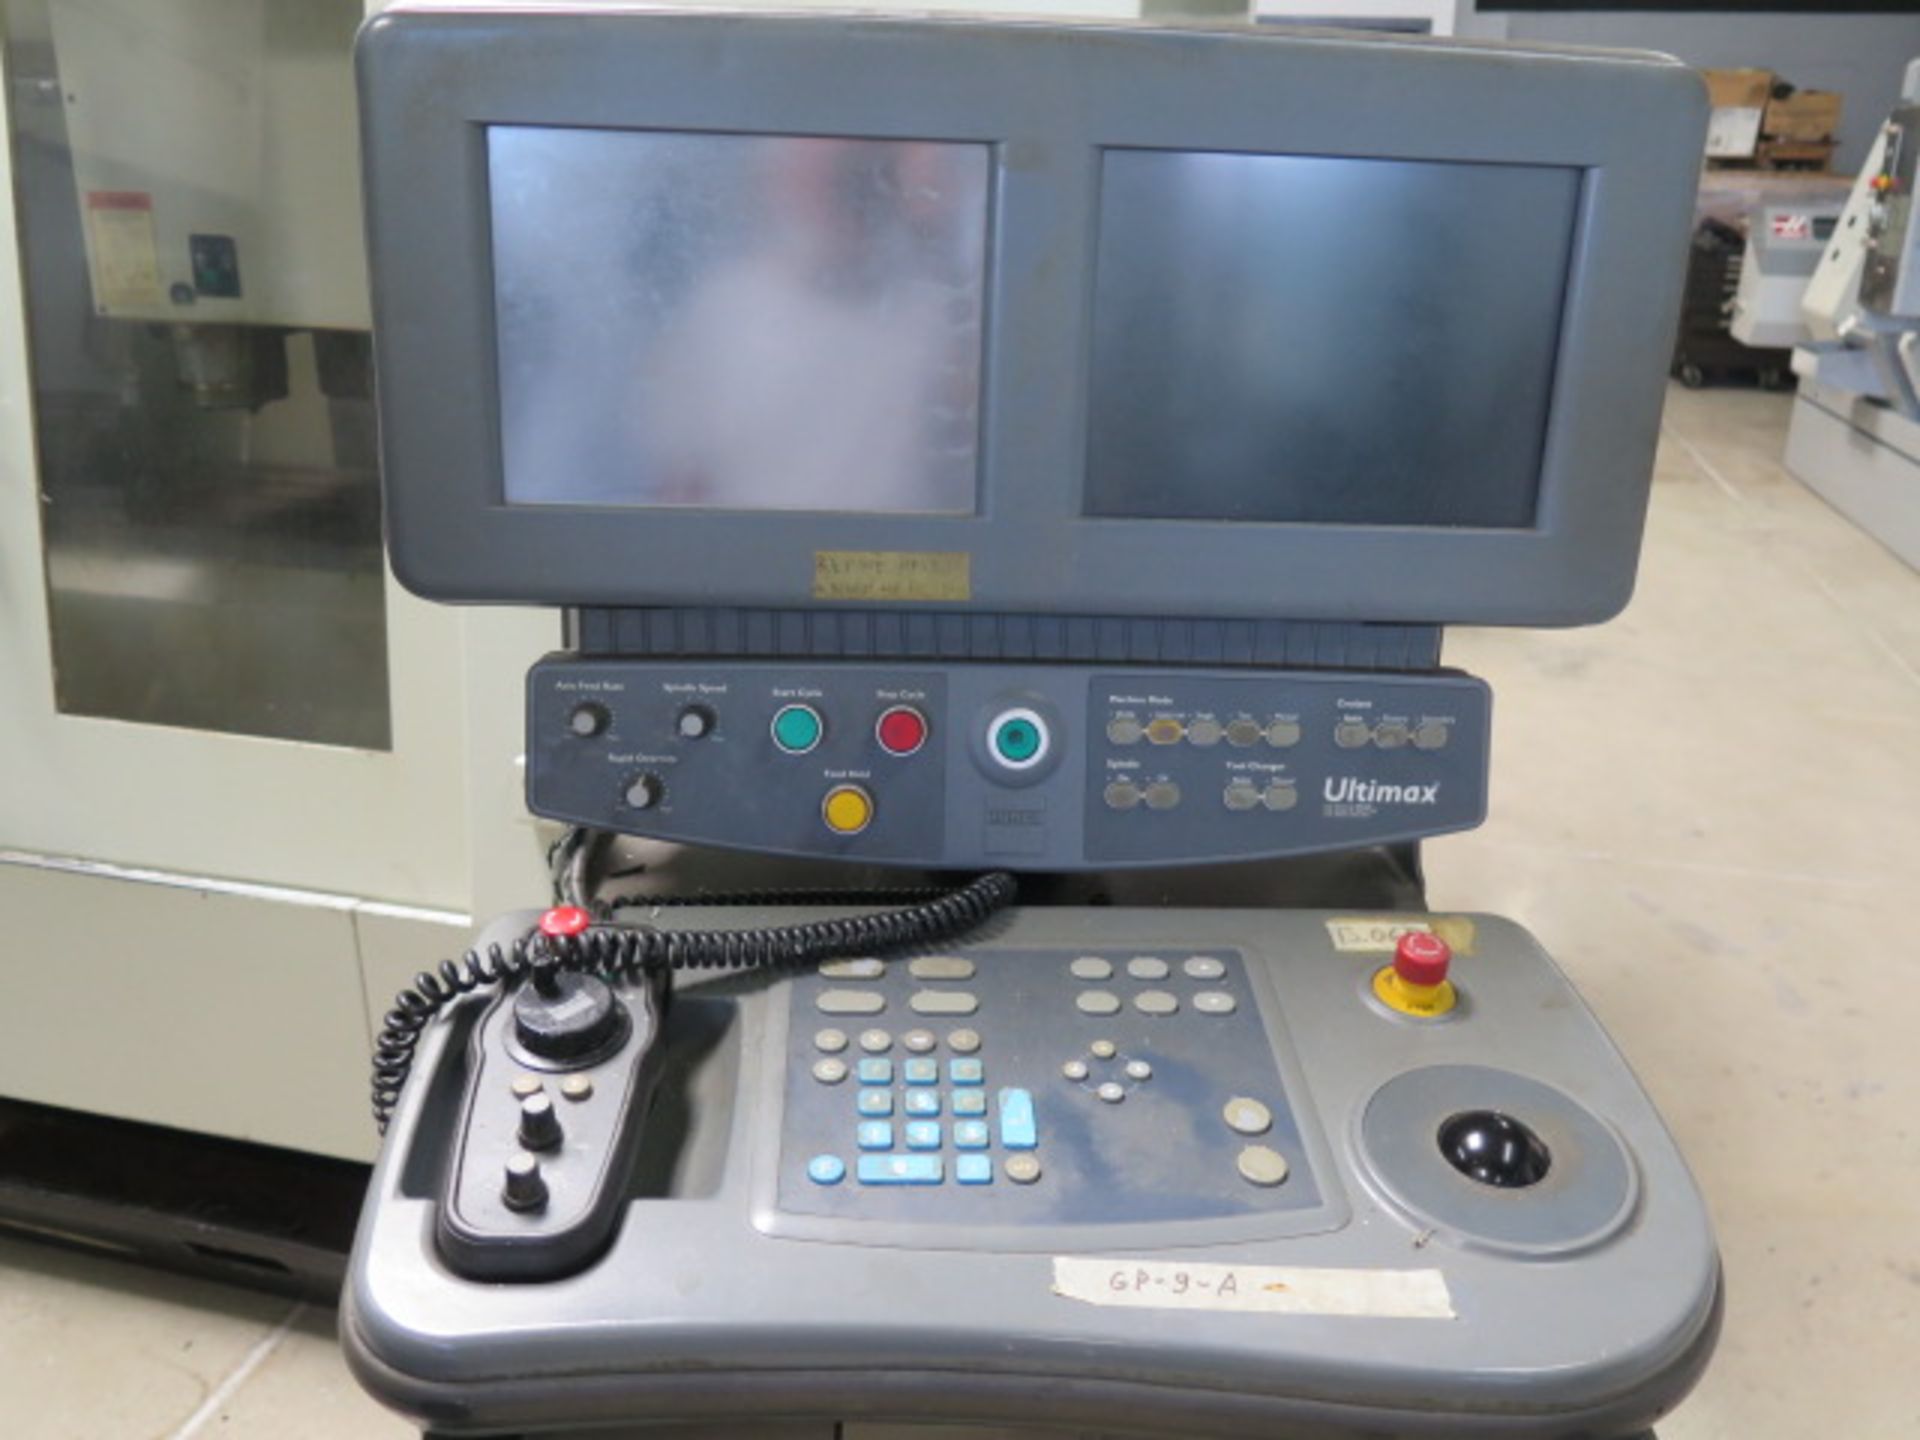 2000 Hurco BMC4020 CNC VMC, s/n B42M-01009060EB w/ Ultimax CNC Controls, Sold AS IS with NO Waranty - Image 4 of 13